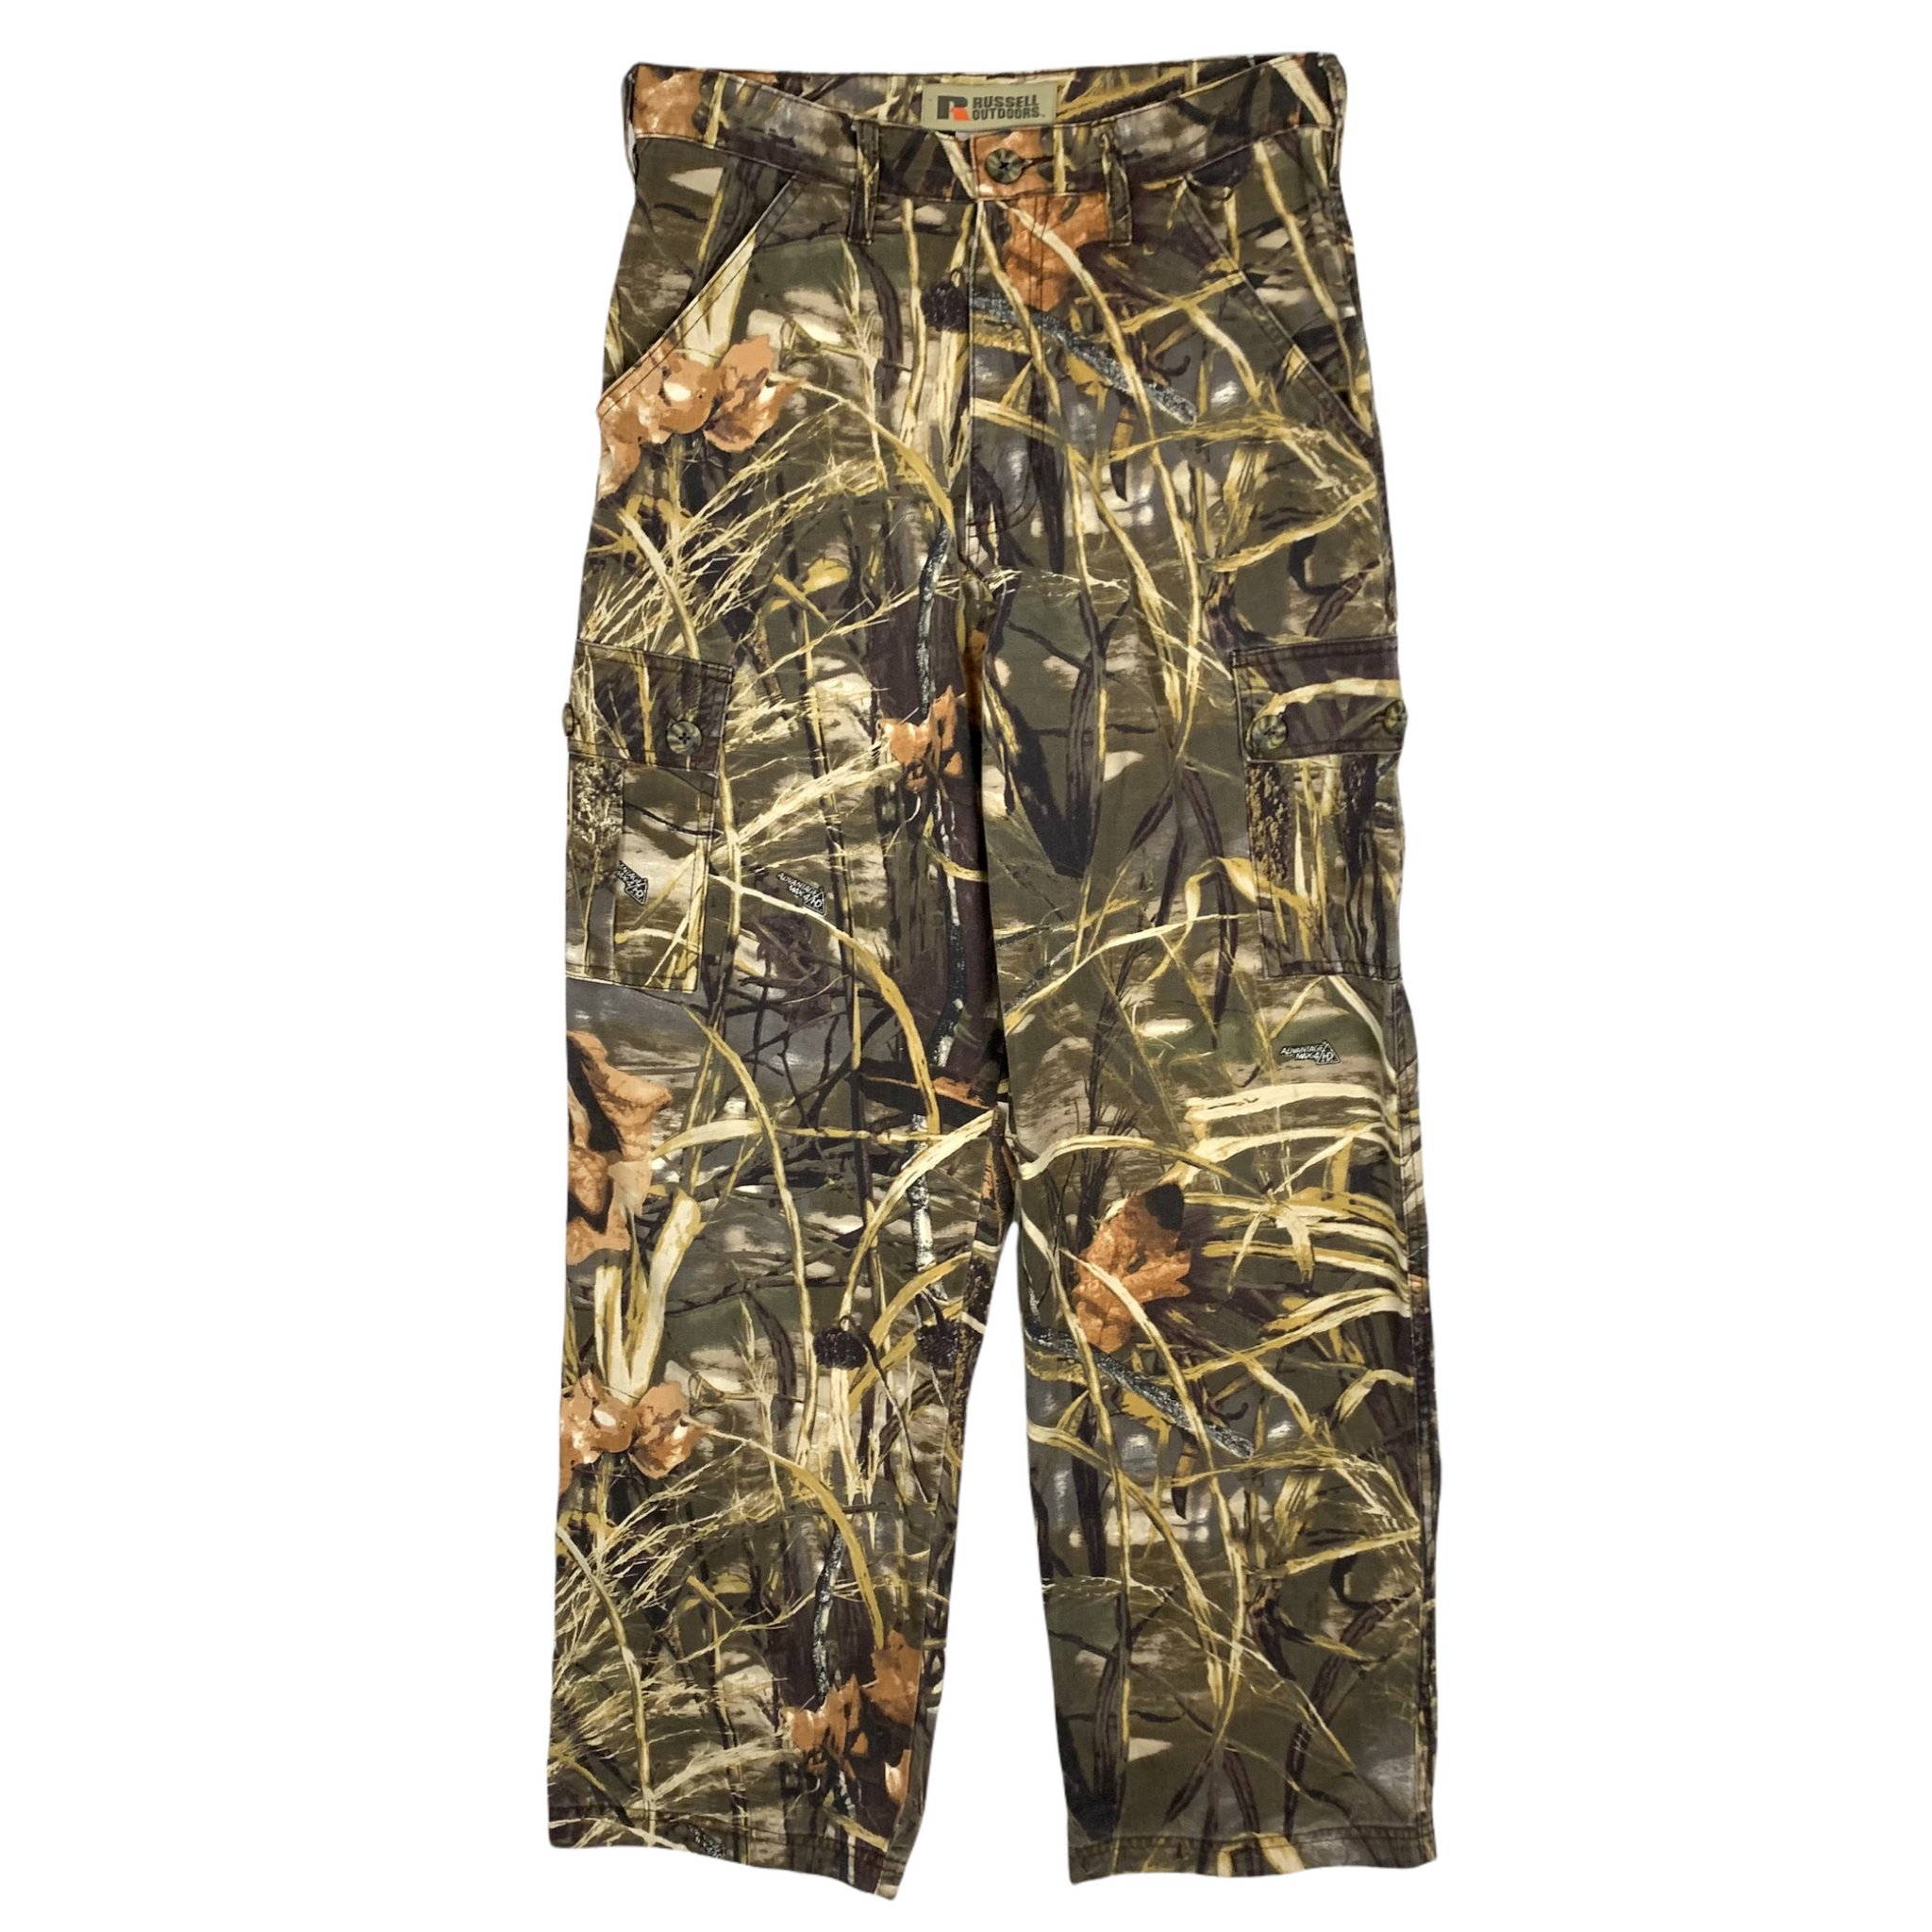 Russell Outdoors Real Tree Camo Pants - Size S – Snafu Studios